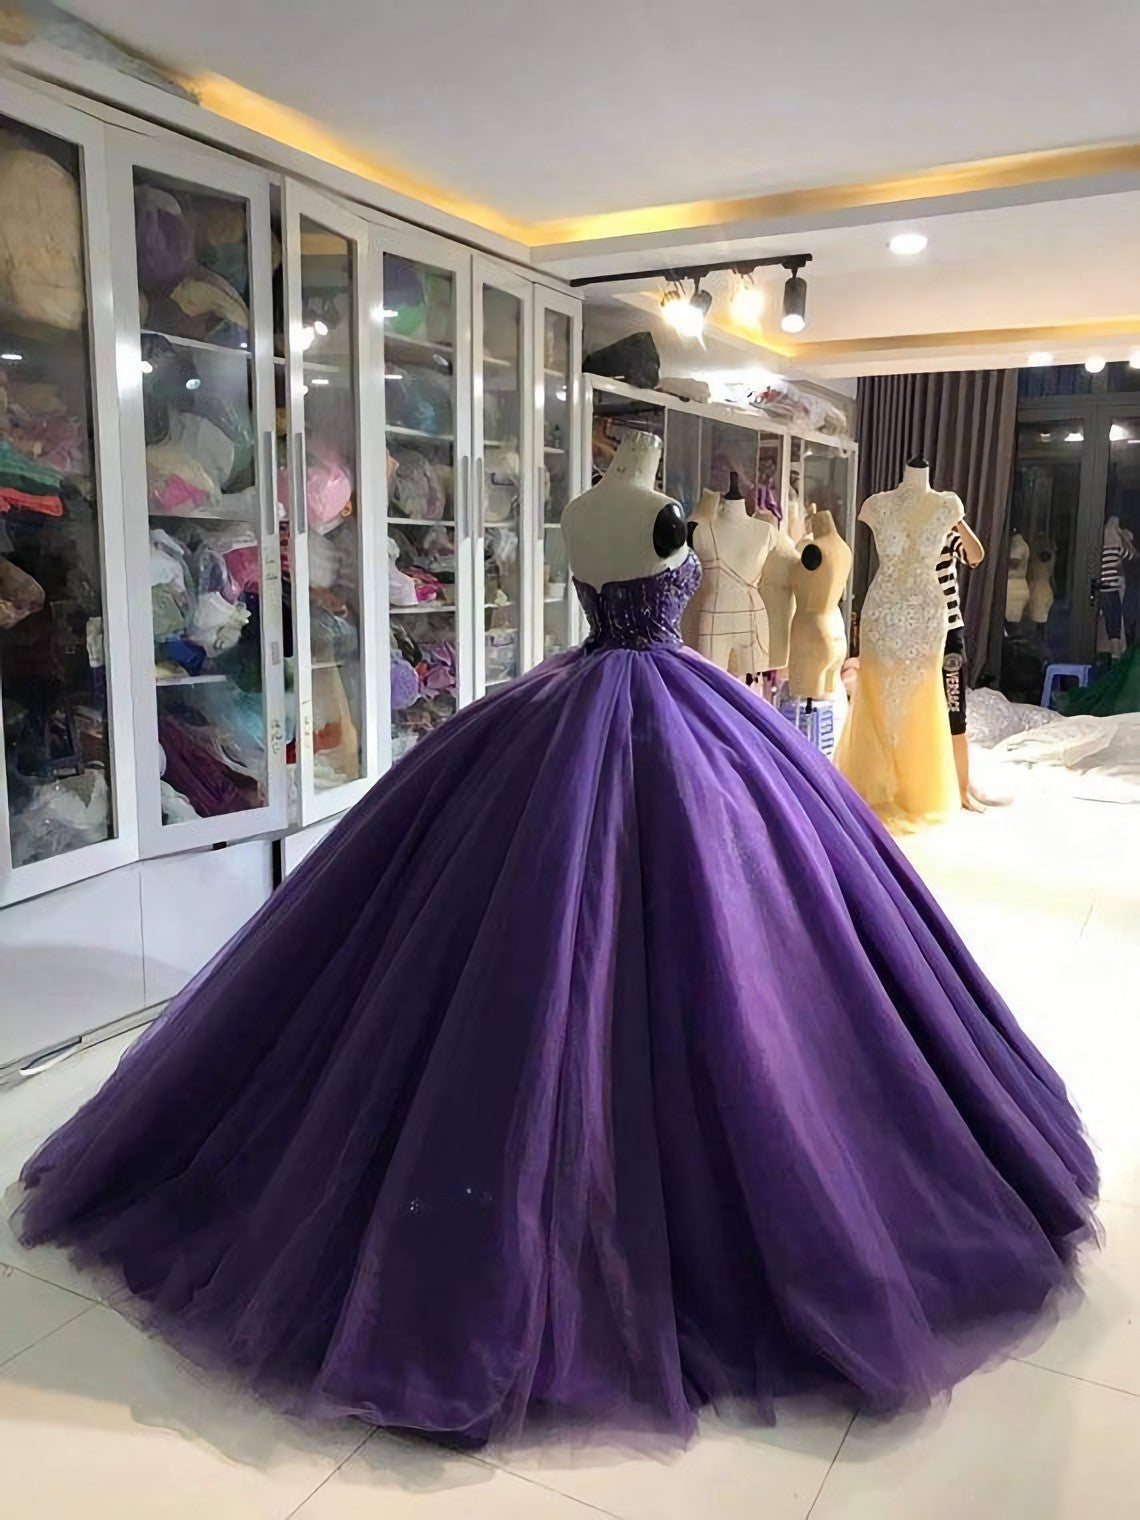 Party Dress Couple, Purple Dress, Ball Gown Prom Dress, Strapless Ball Gown